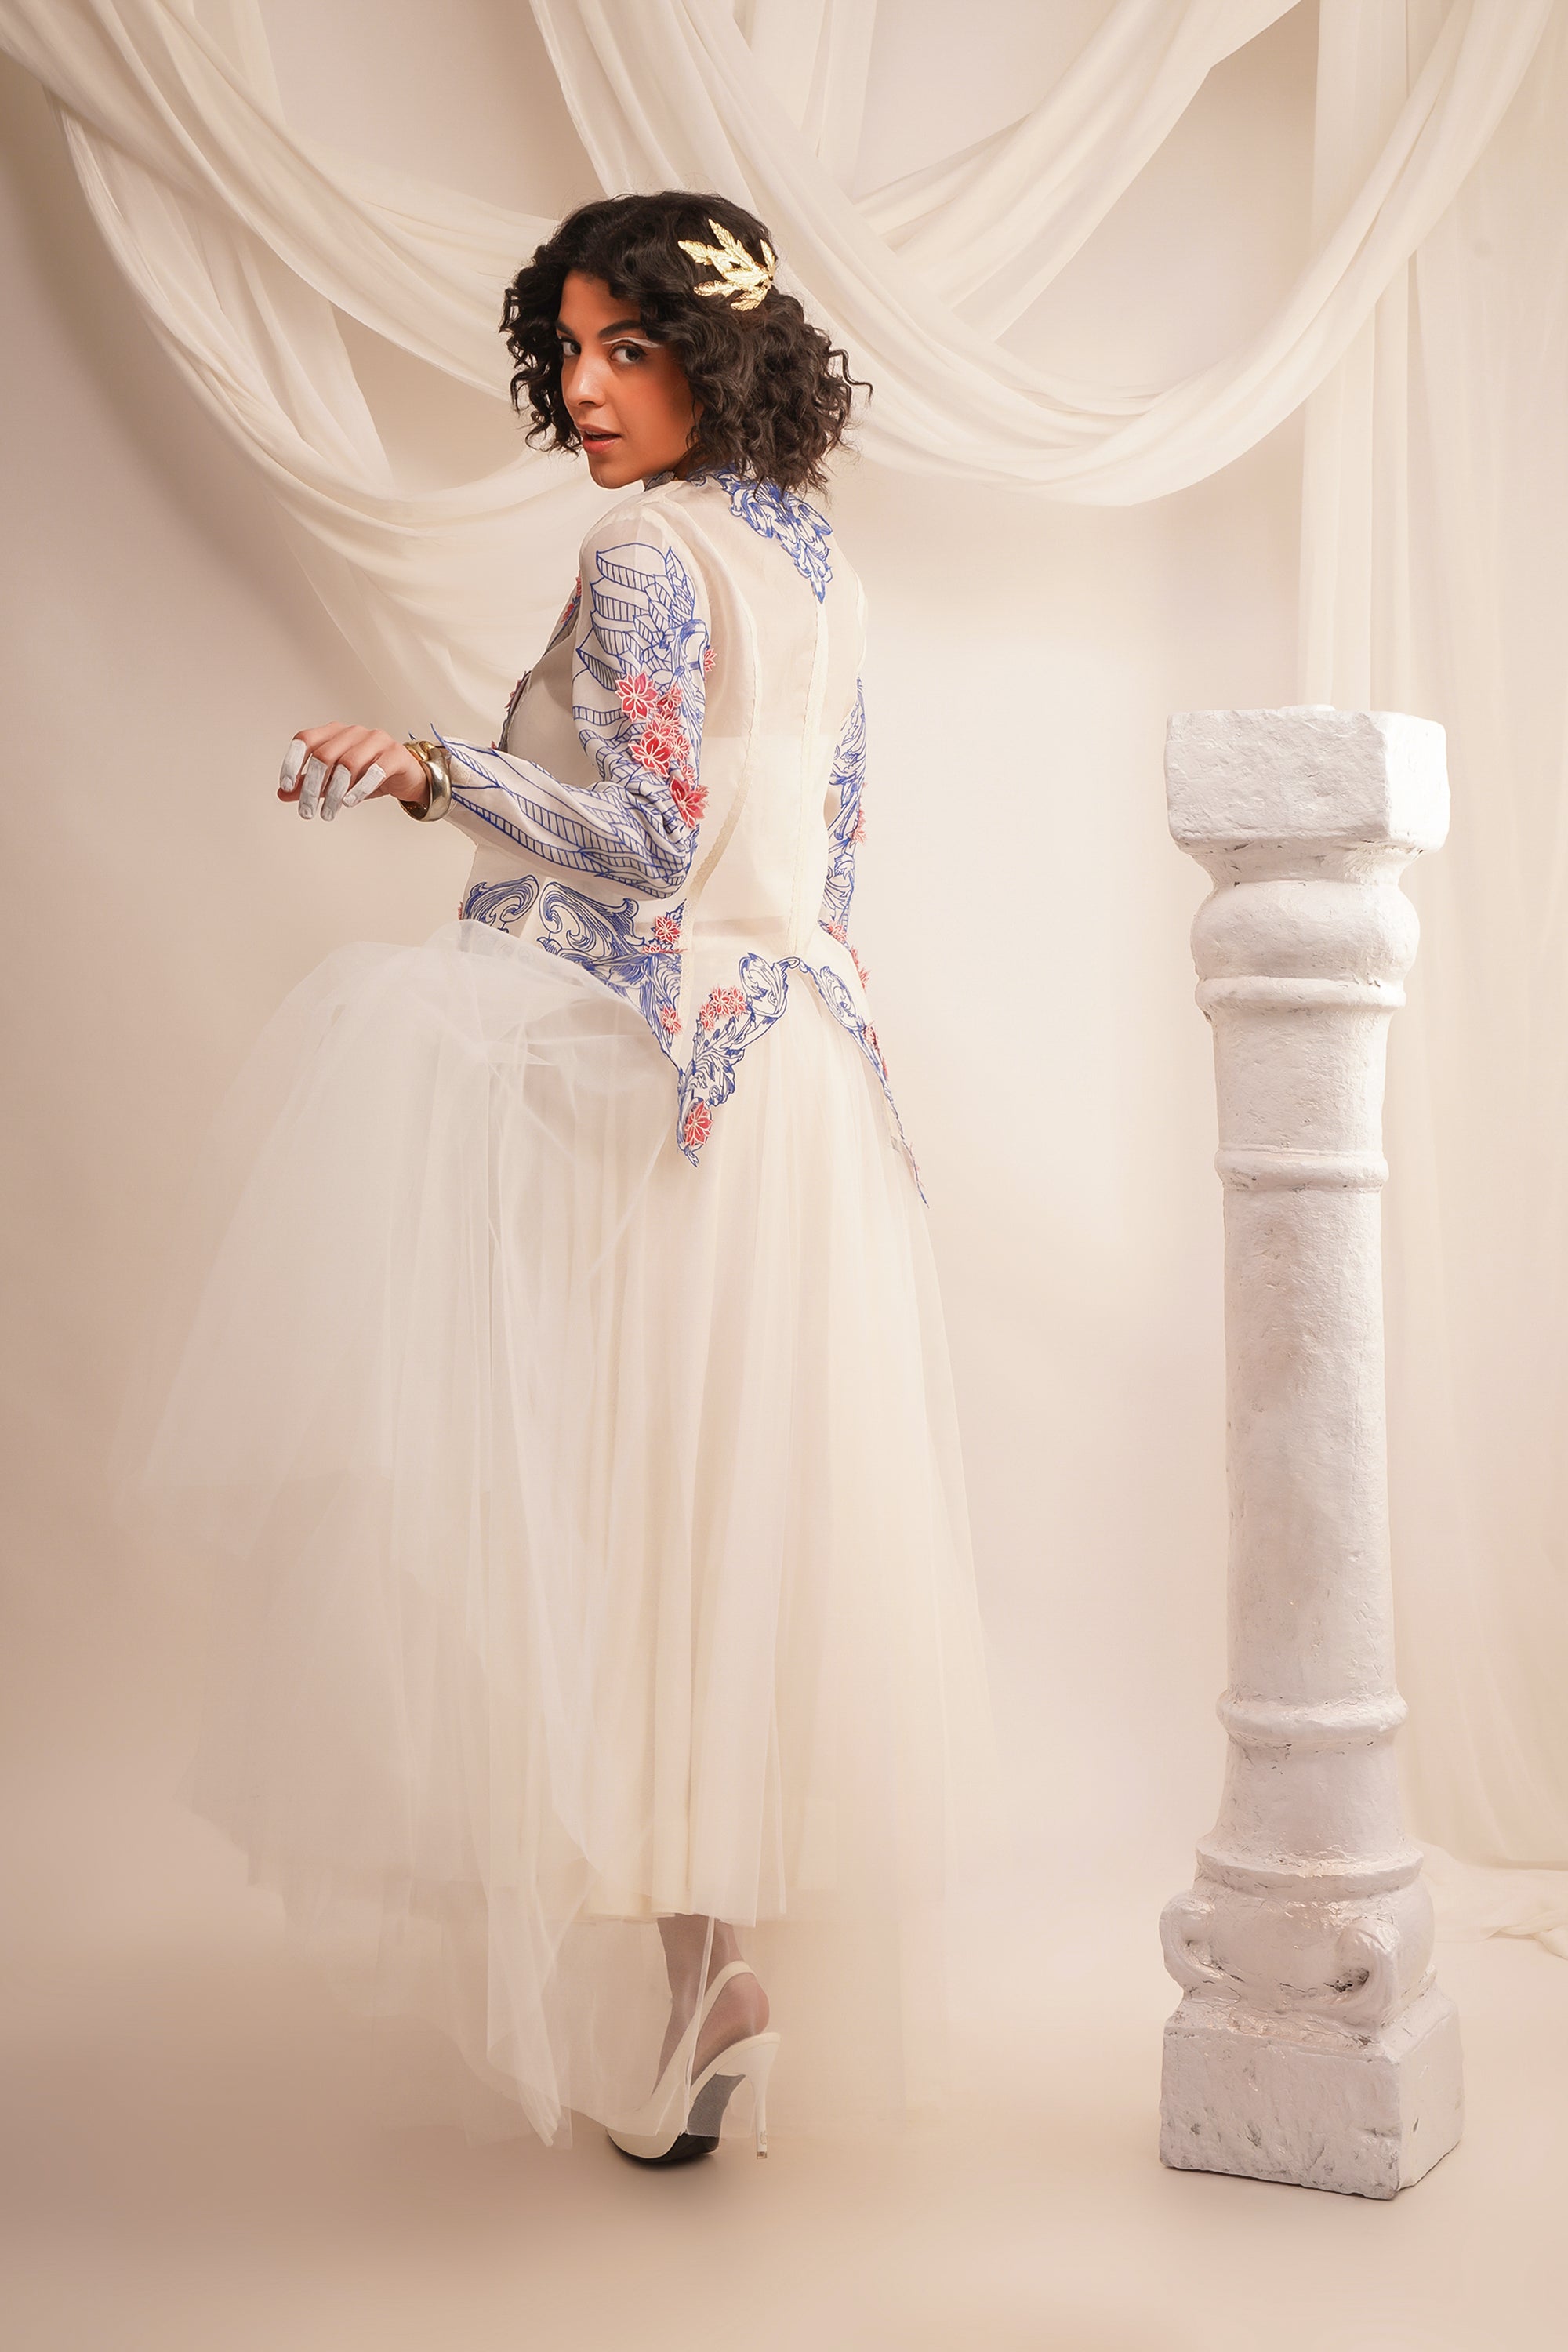 Ivory Cowl Neck Organza Jacket with Wing Detailing on The Sleeves